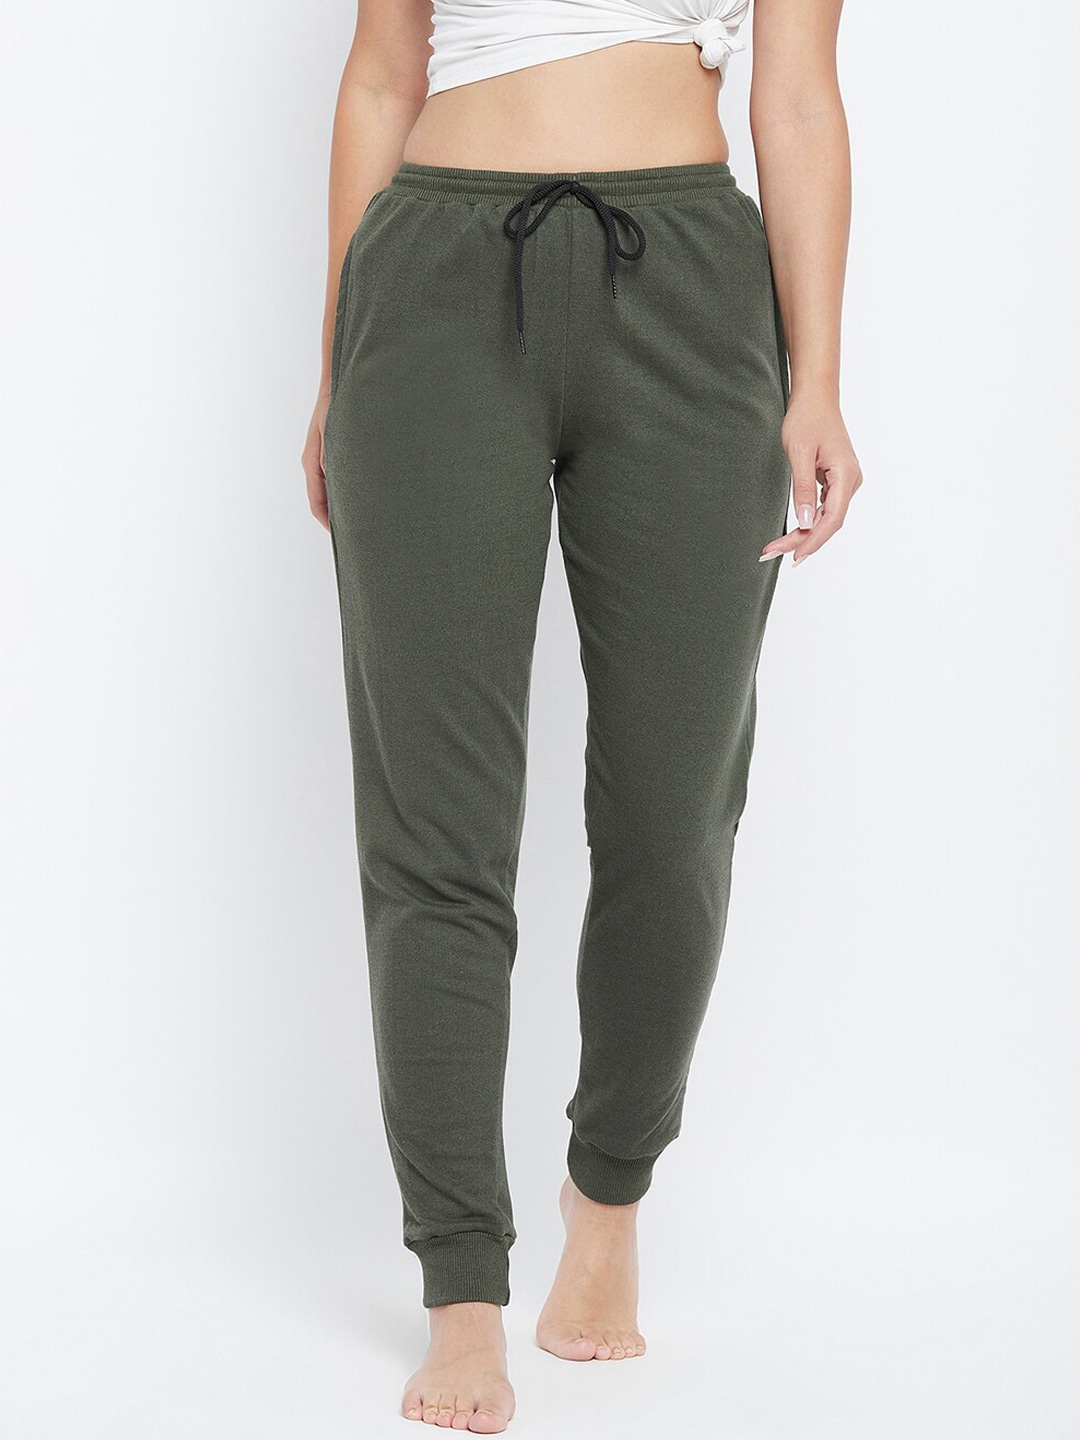 Clovia Woman Green Knitted Regular Lounge Pants Price in India